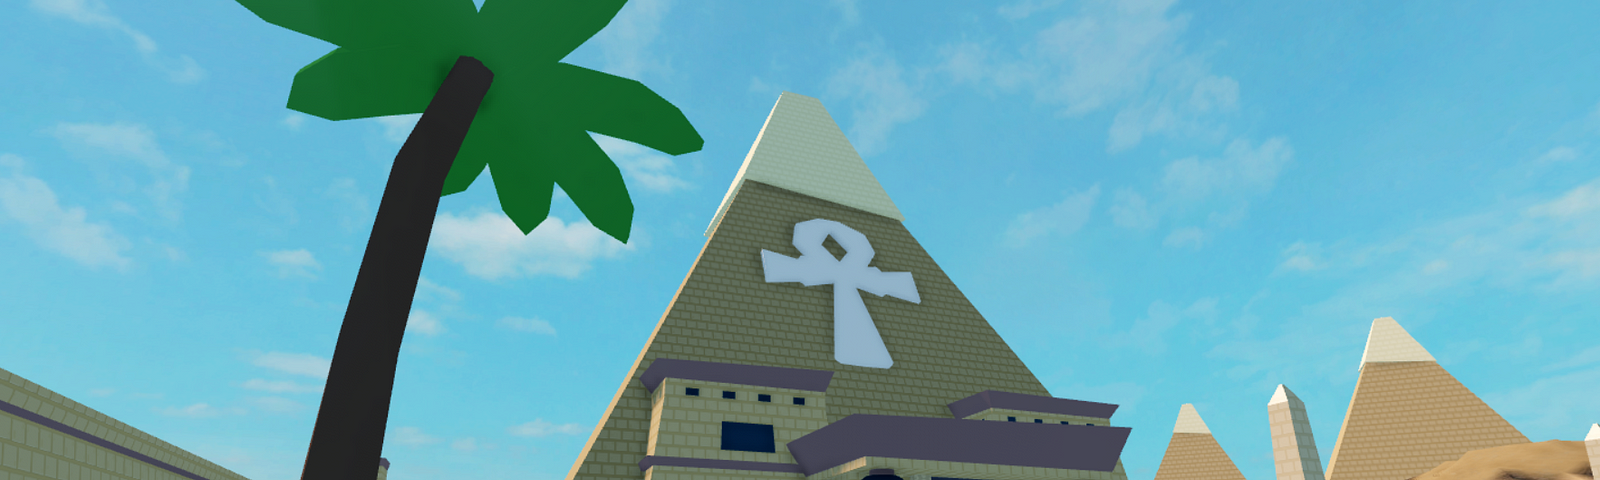 From the Devs”: Why Roblox is Going to Change the World, by Jandel, by  Roblox Developer Relations, Developer Baseplate